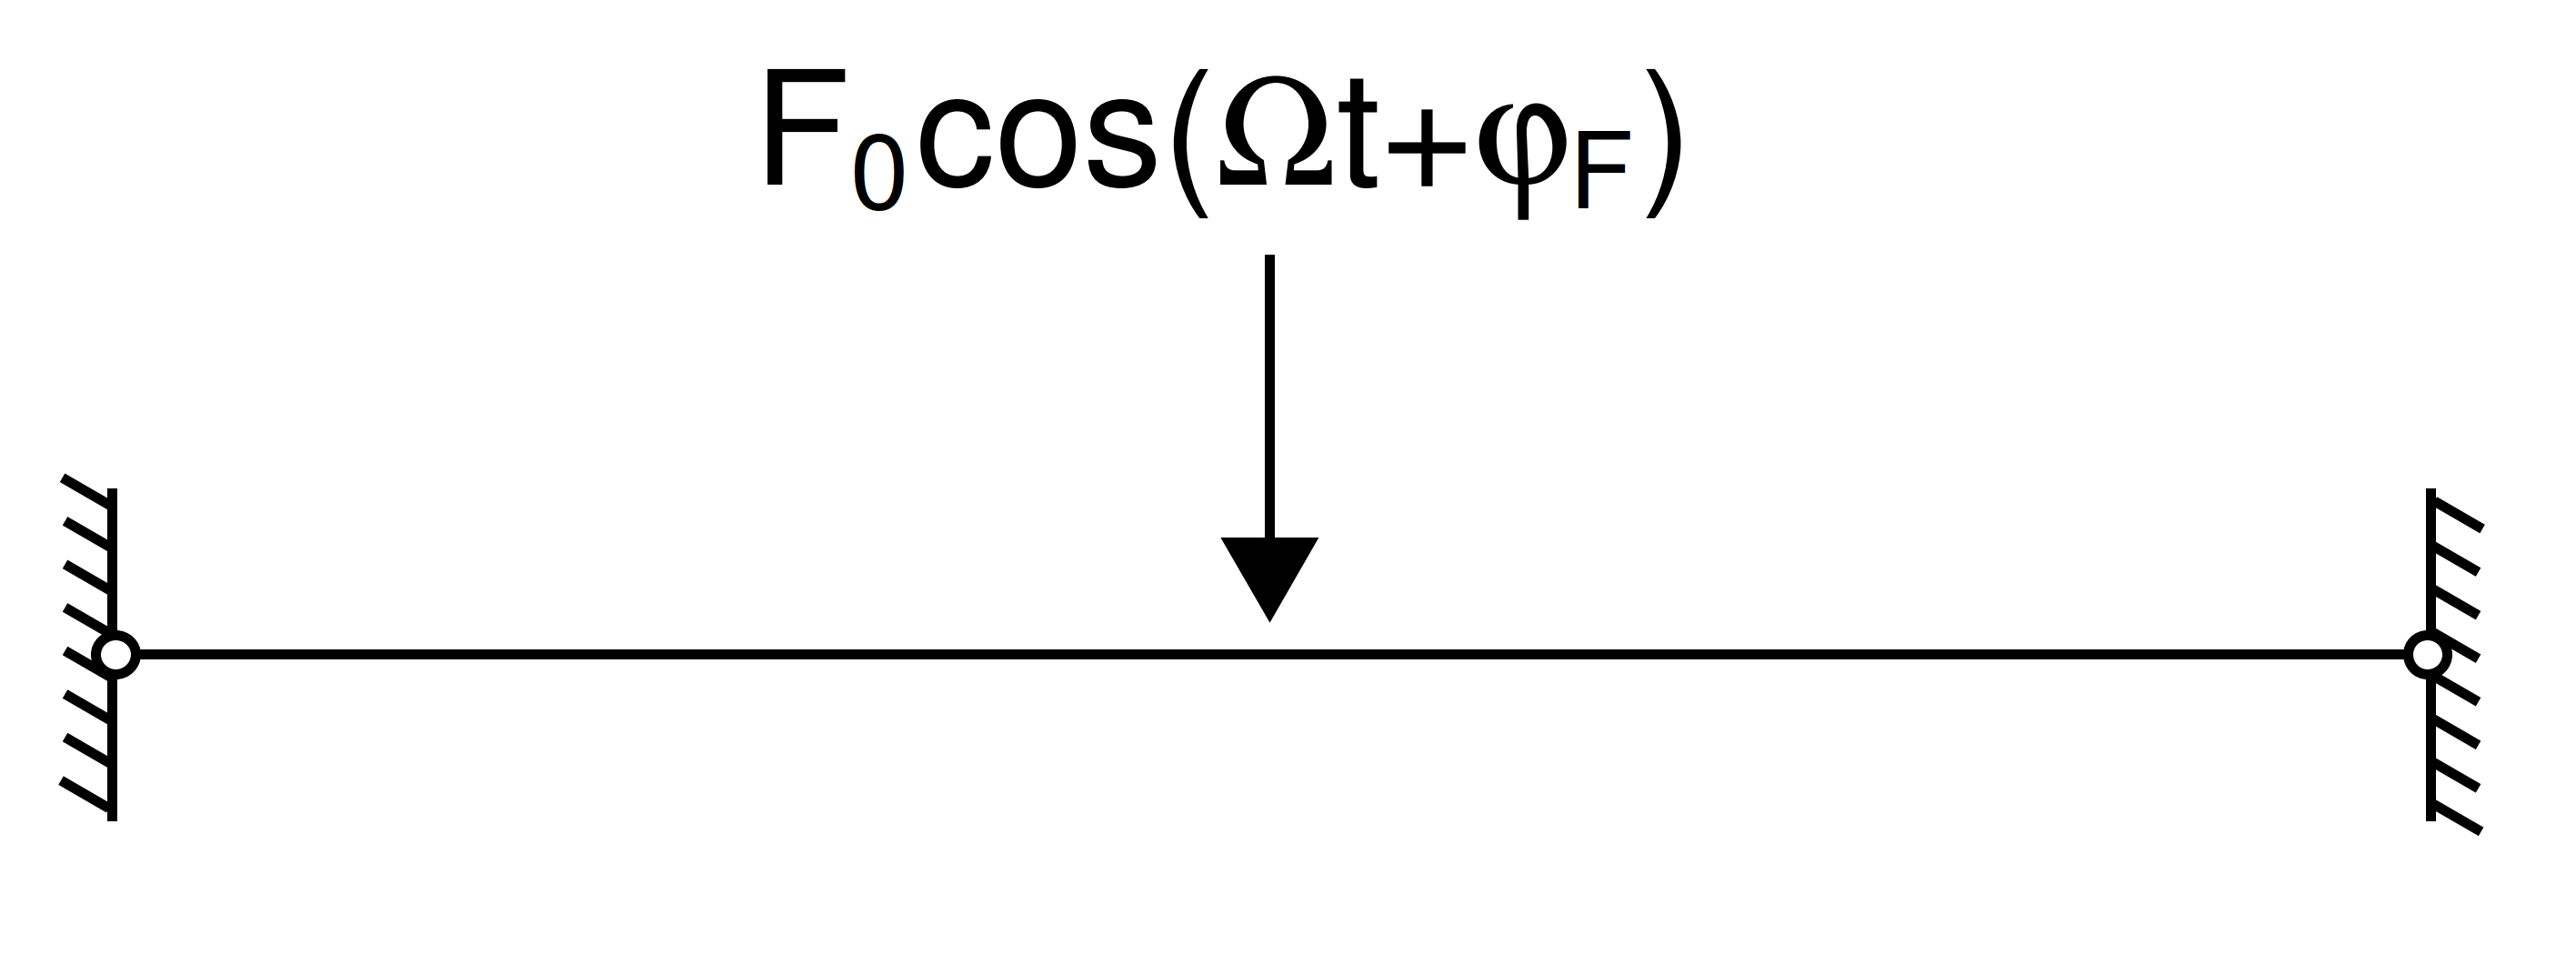 Host structure for the validation of the different models